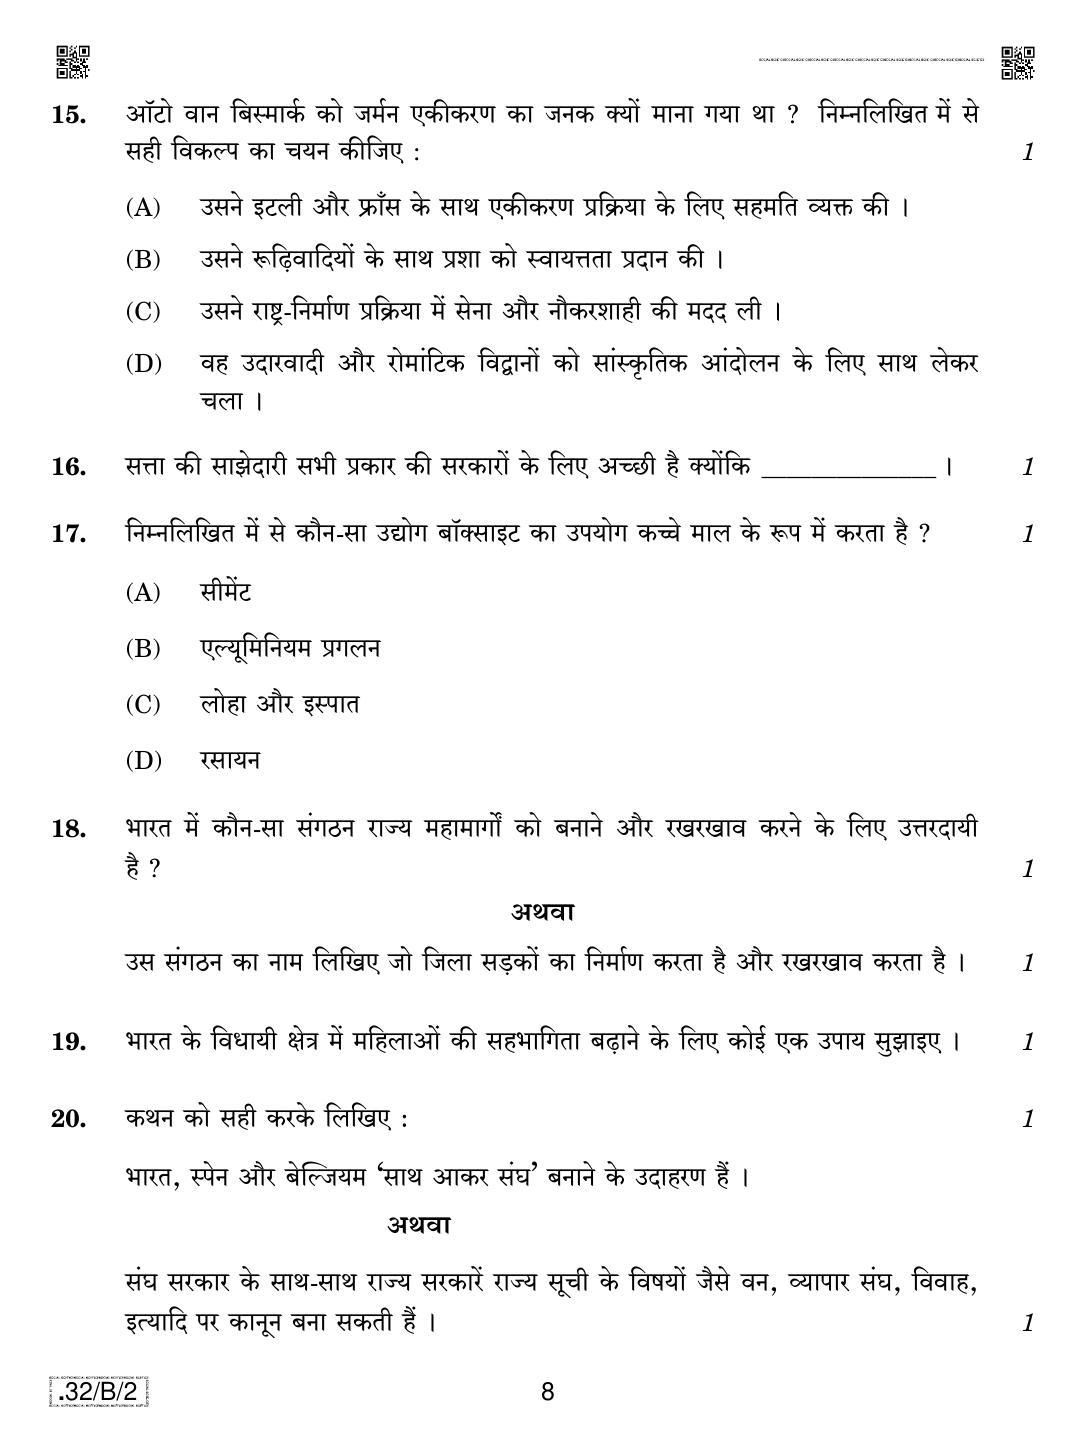 CBSE Class 10 32-C-2 Social Science 2020 Compartment Question Paper - Page 8